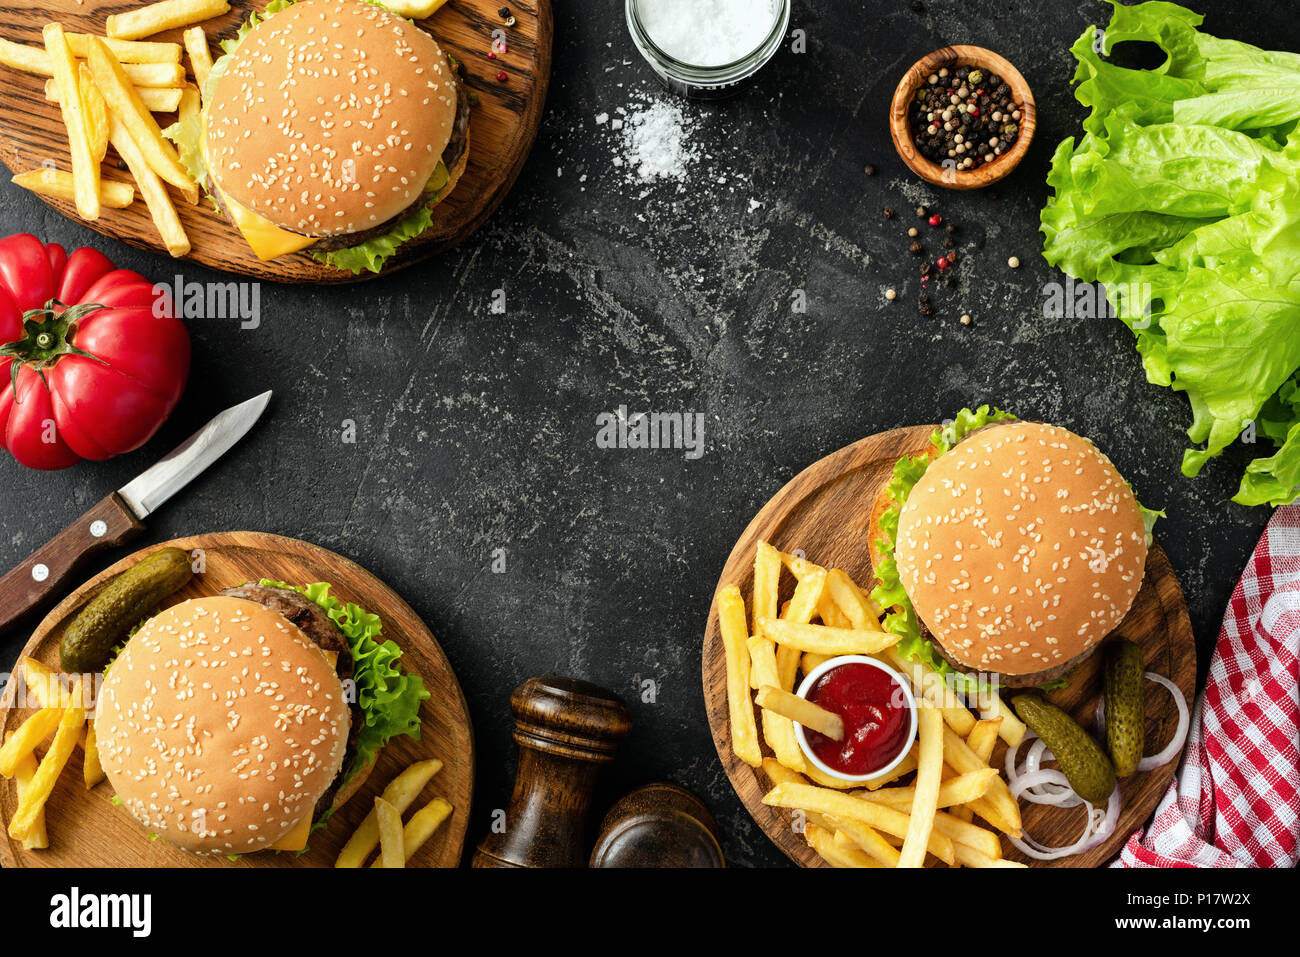 Burgers, hamburgers, french fries and fresh vegetables. BBQ party food. Dark background, top view and copy space for text. Summer barbecue concept Stock Photo